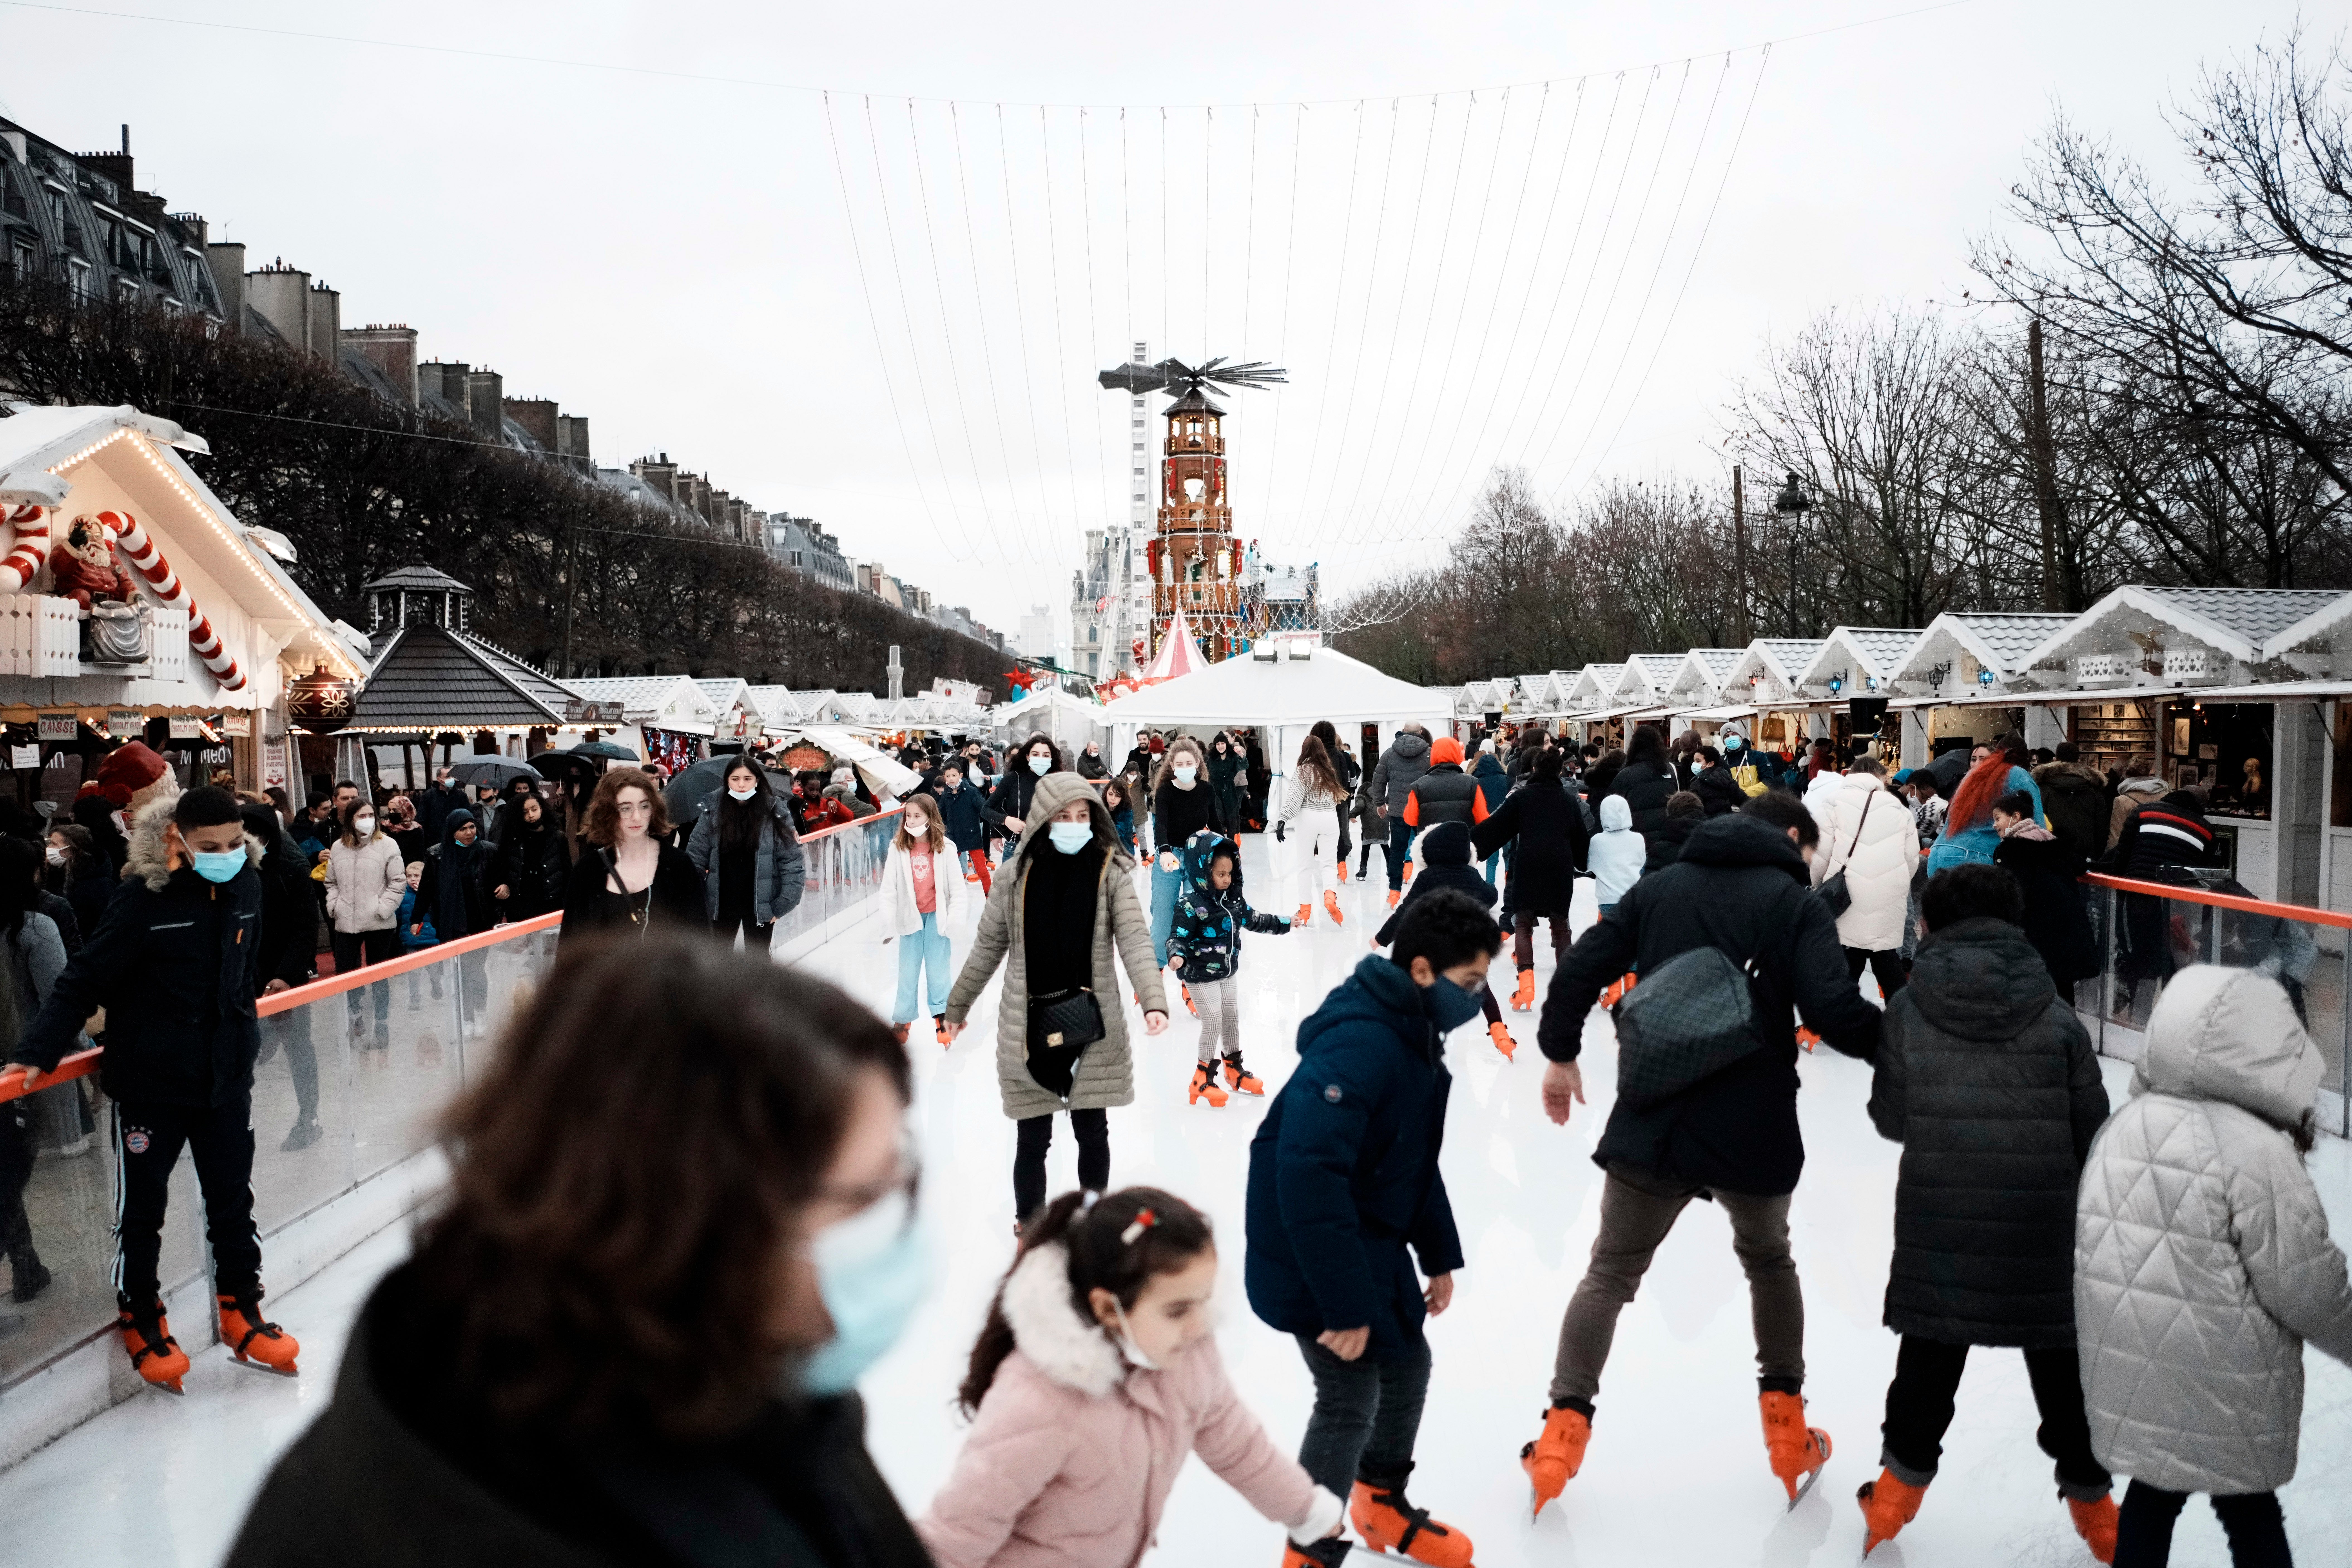 People wear face masks to curb the spread of COVID-19 as they ice skate at a funfair in Paris